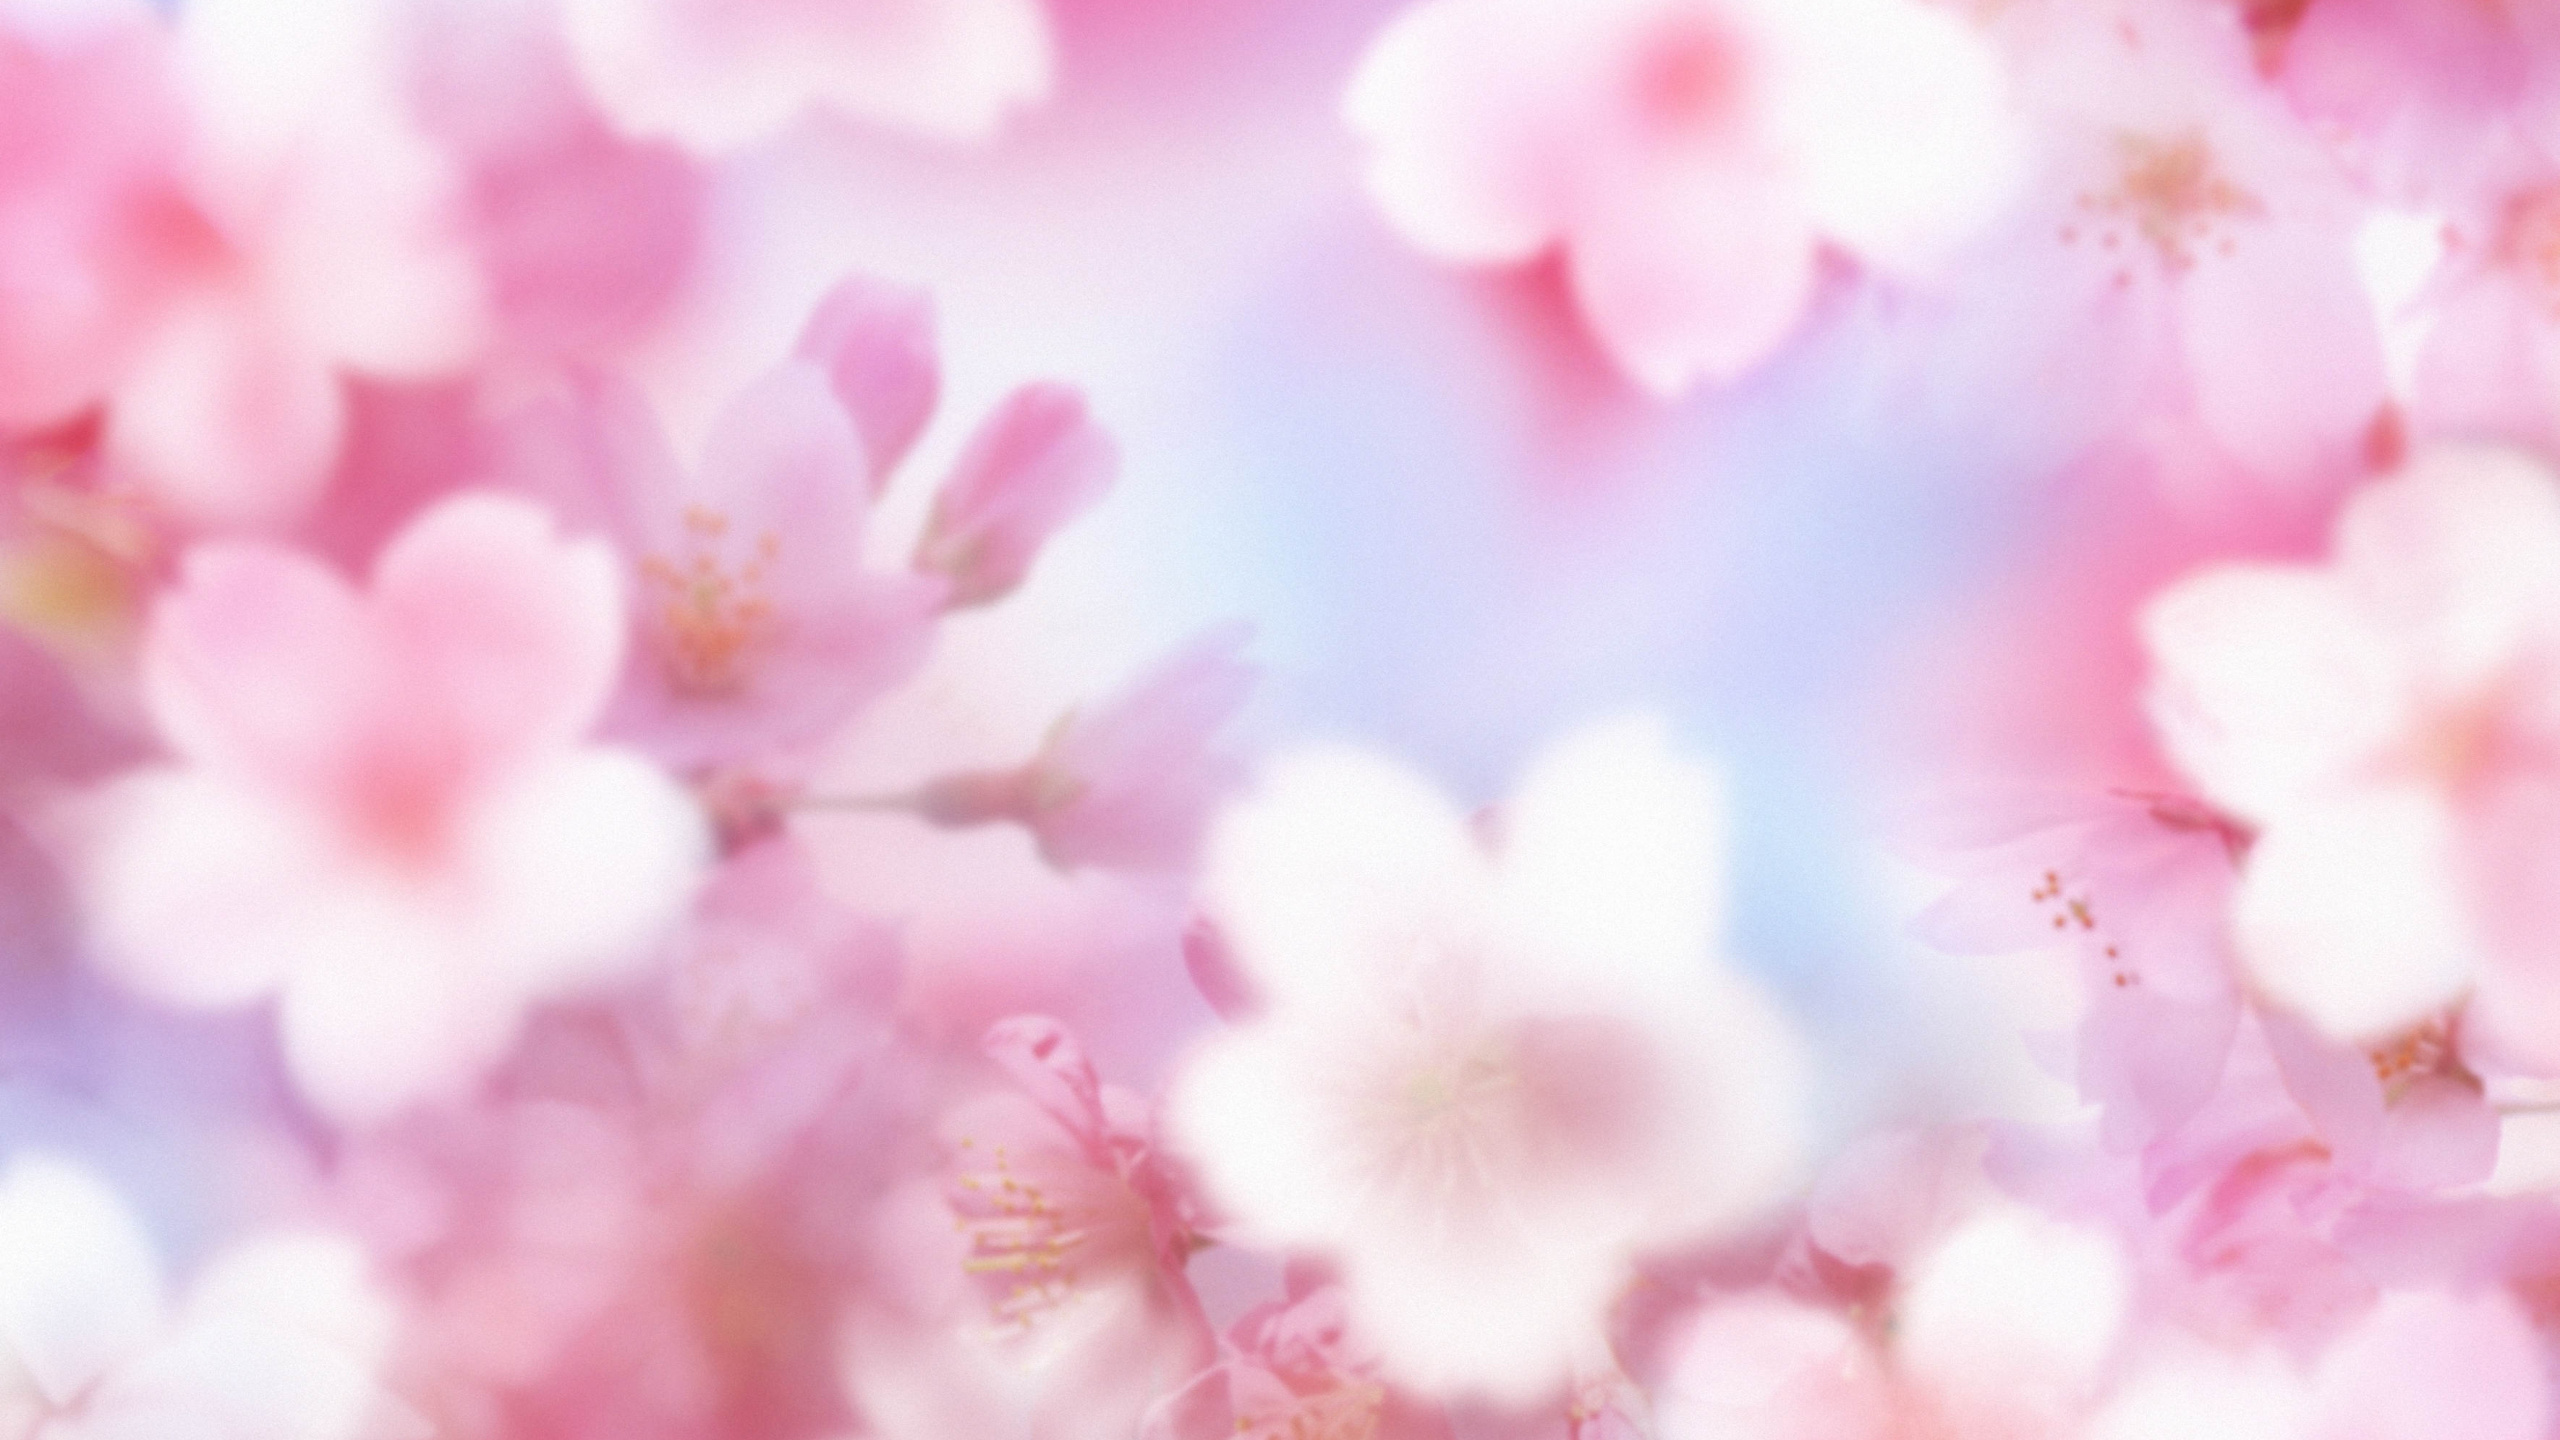 Pink Cherry Blossom Under Blue Sky During Daytime. Wallpaper in 2560x1440 Resolution